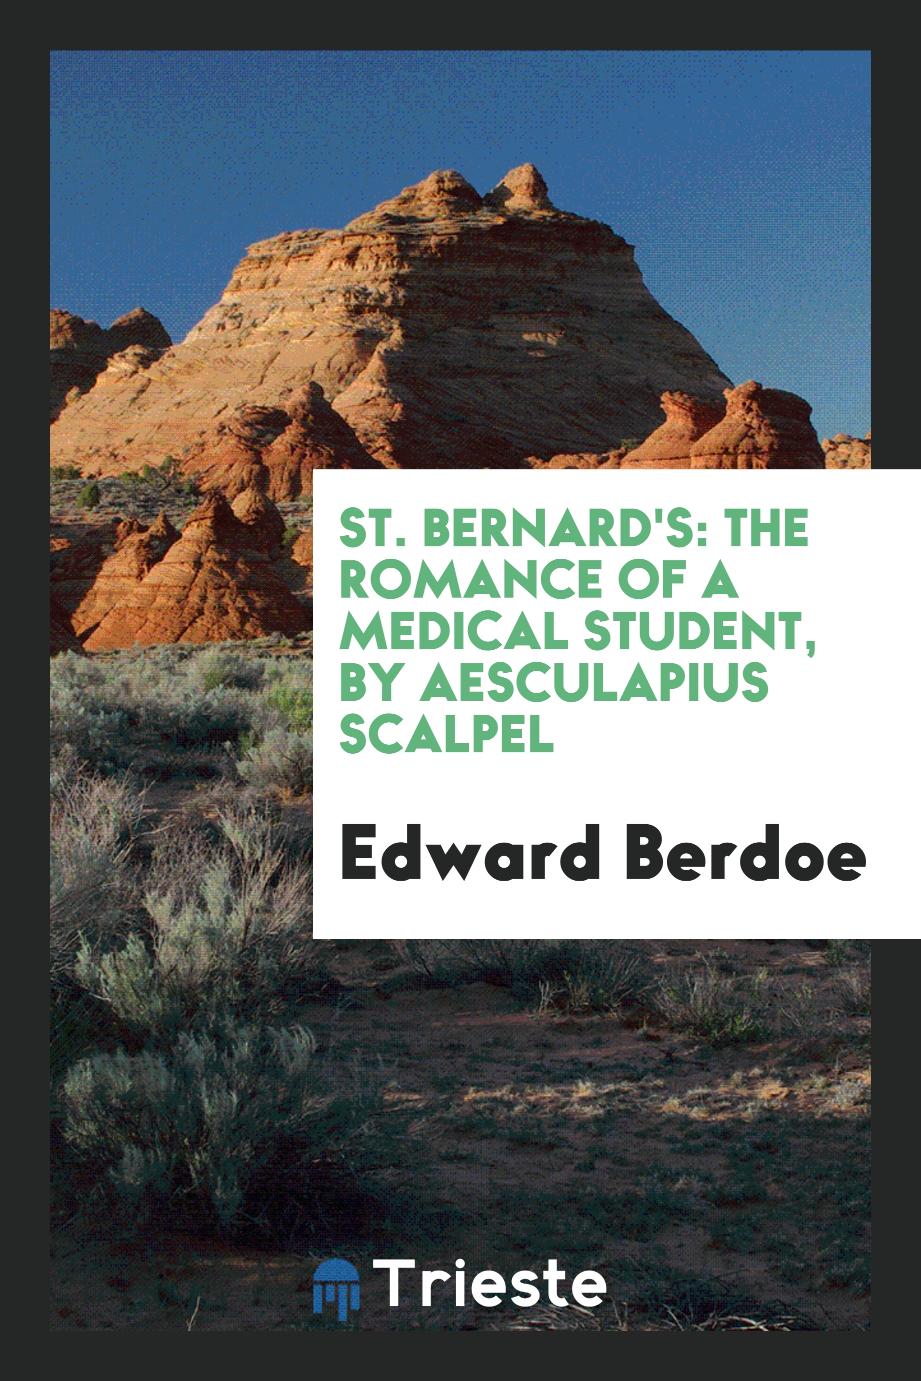 St. Bernard's: The Romance of a Medical Student, by Aesculapius Scalpel